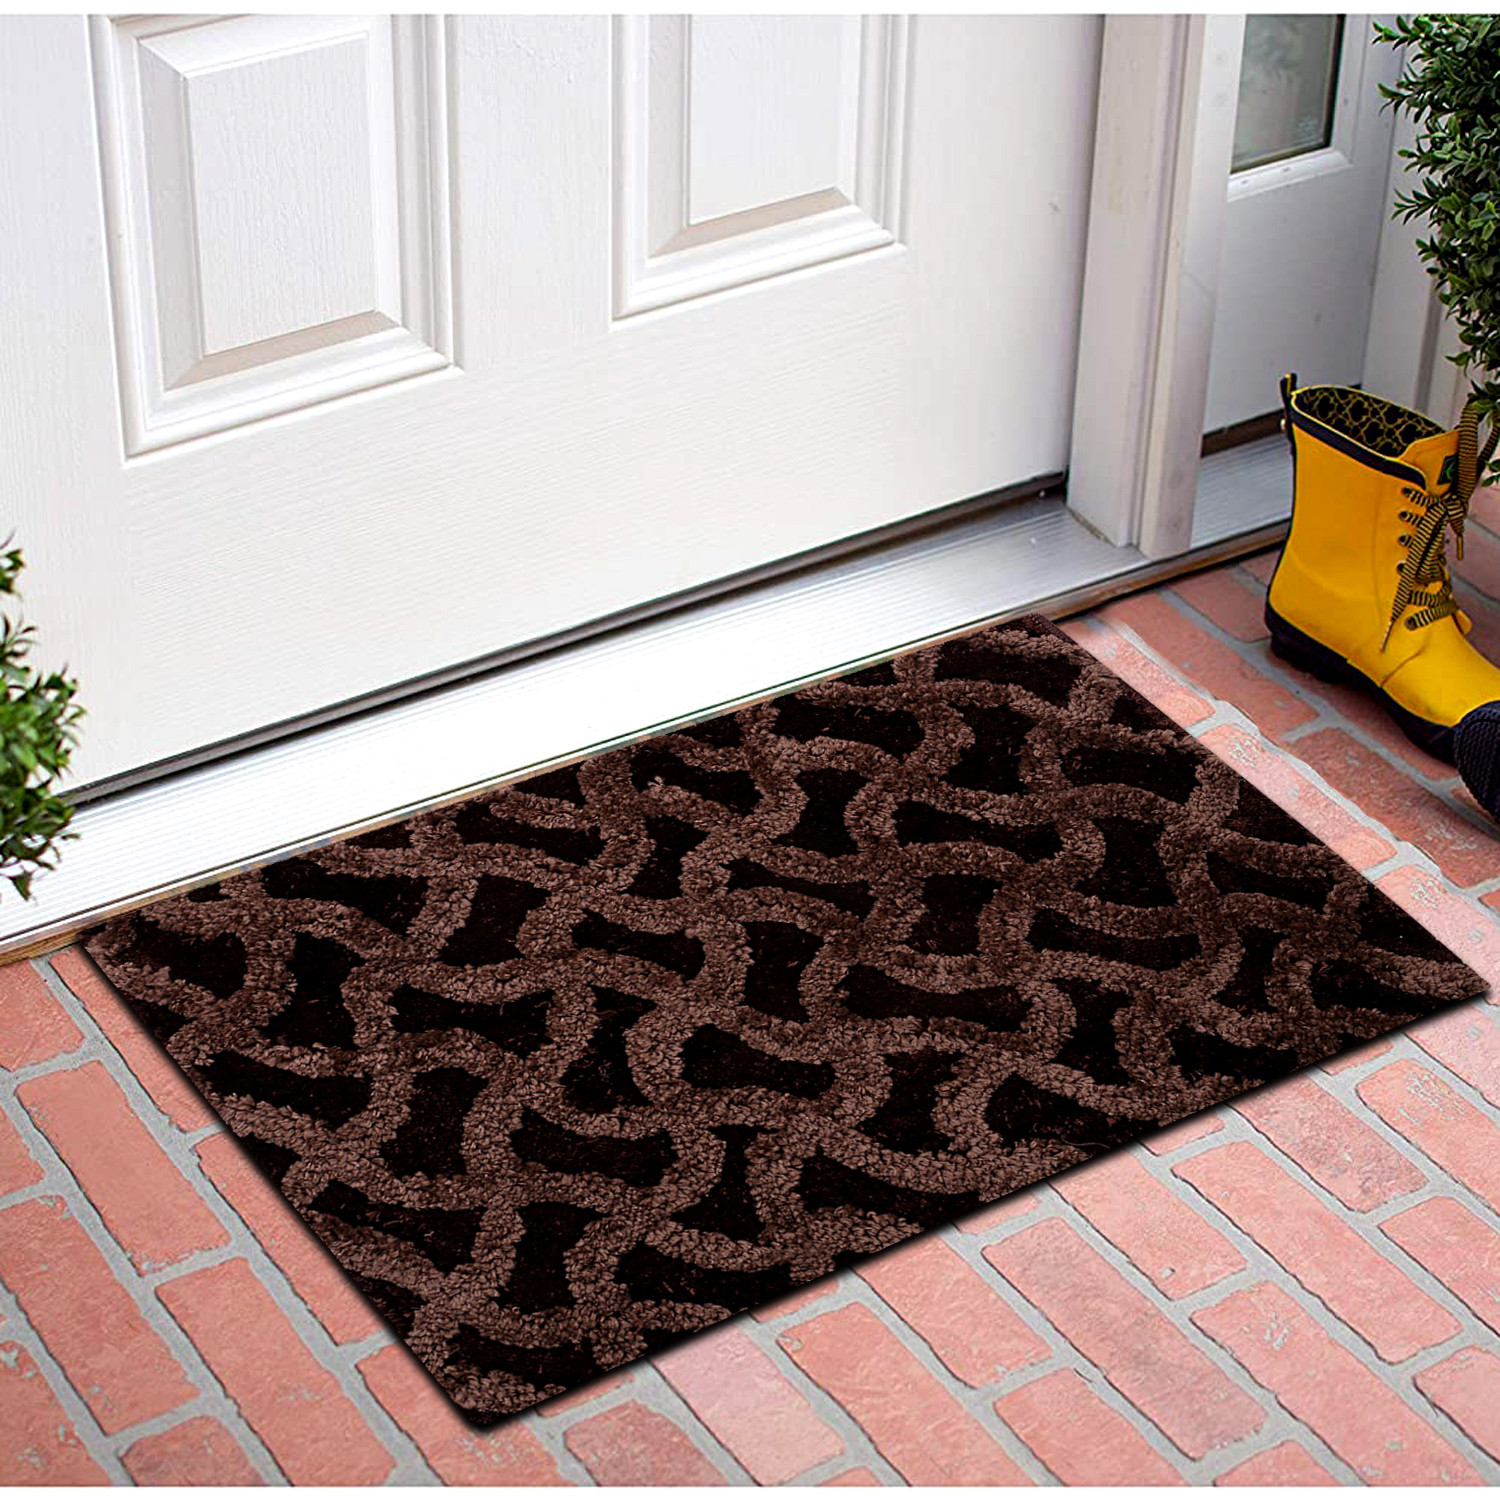 Kuber Industries Soft, lightweigth, Washable, Non Slip Doormat Entrance Rug Dirt Trapper Mat Shoes Scraper for Entry, Patio, Porch- Pack of 3 (Brown & Dark Brown & Grey)